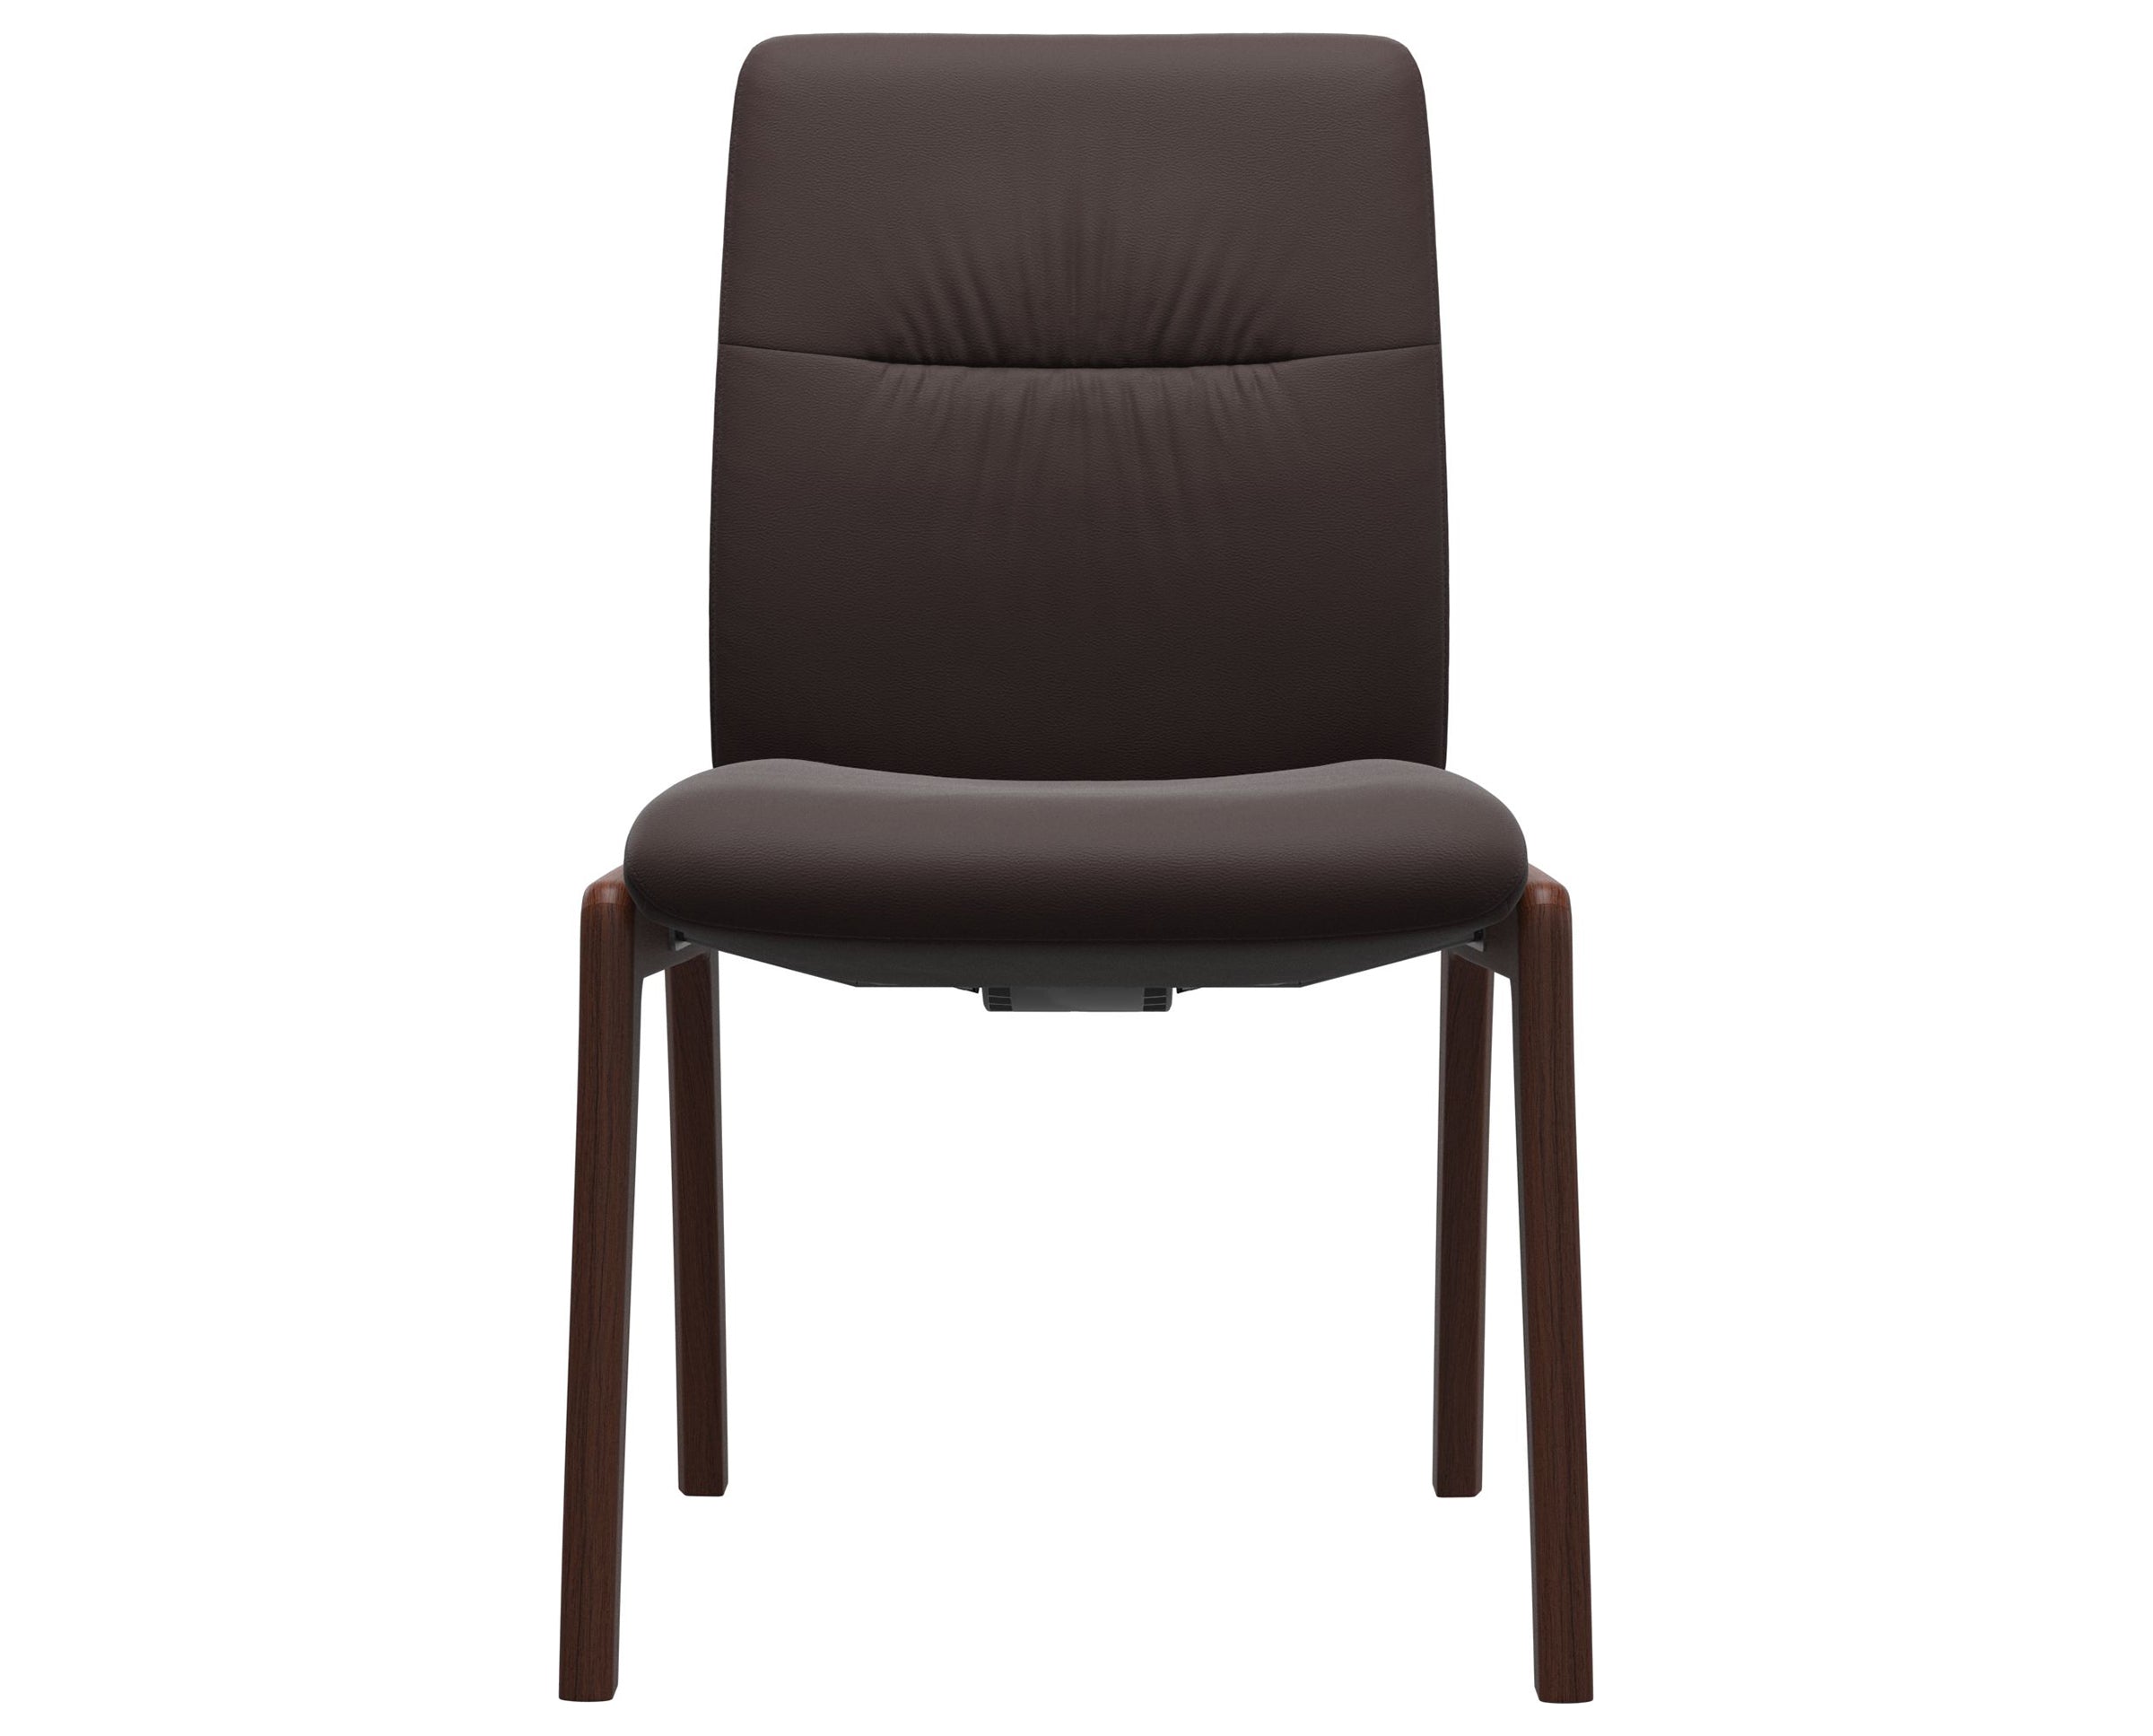 Paloma Leather Chocolate and Walnut Base | Stressless Mint Low Back D100 Dining Chair | Valley Ridge Furniture